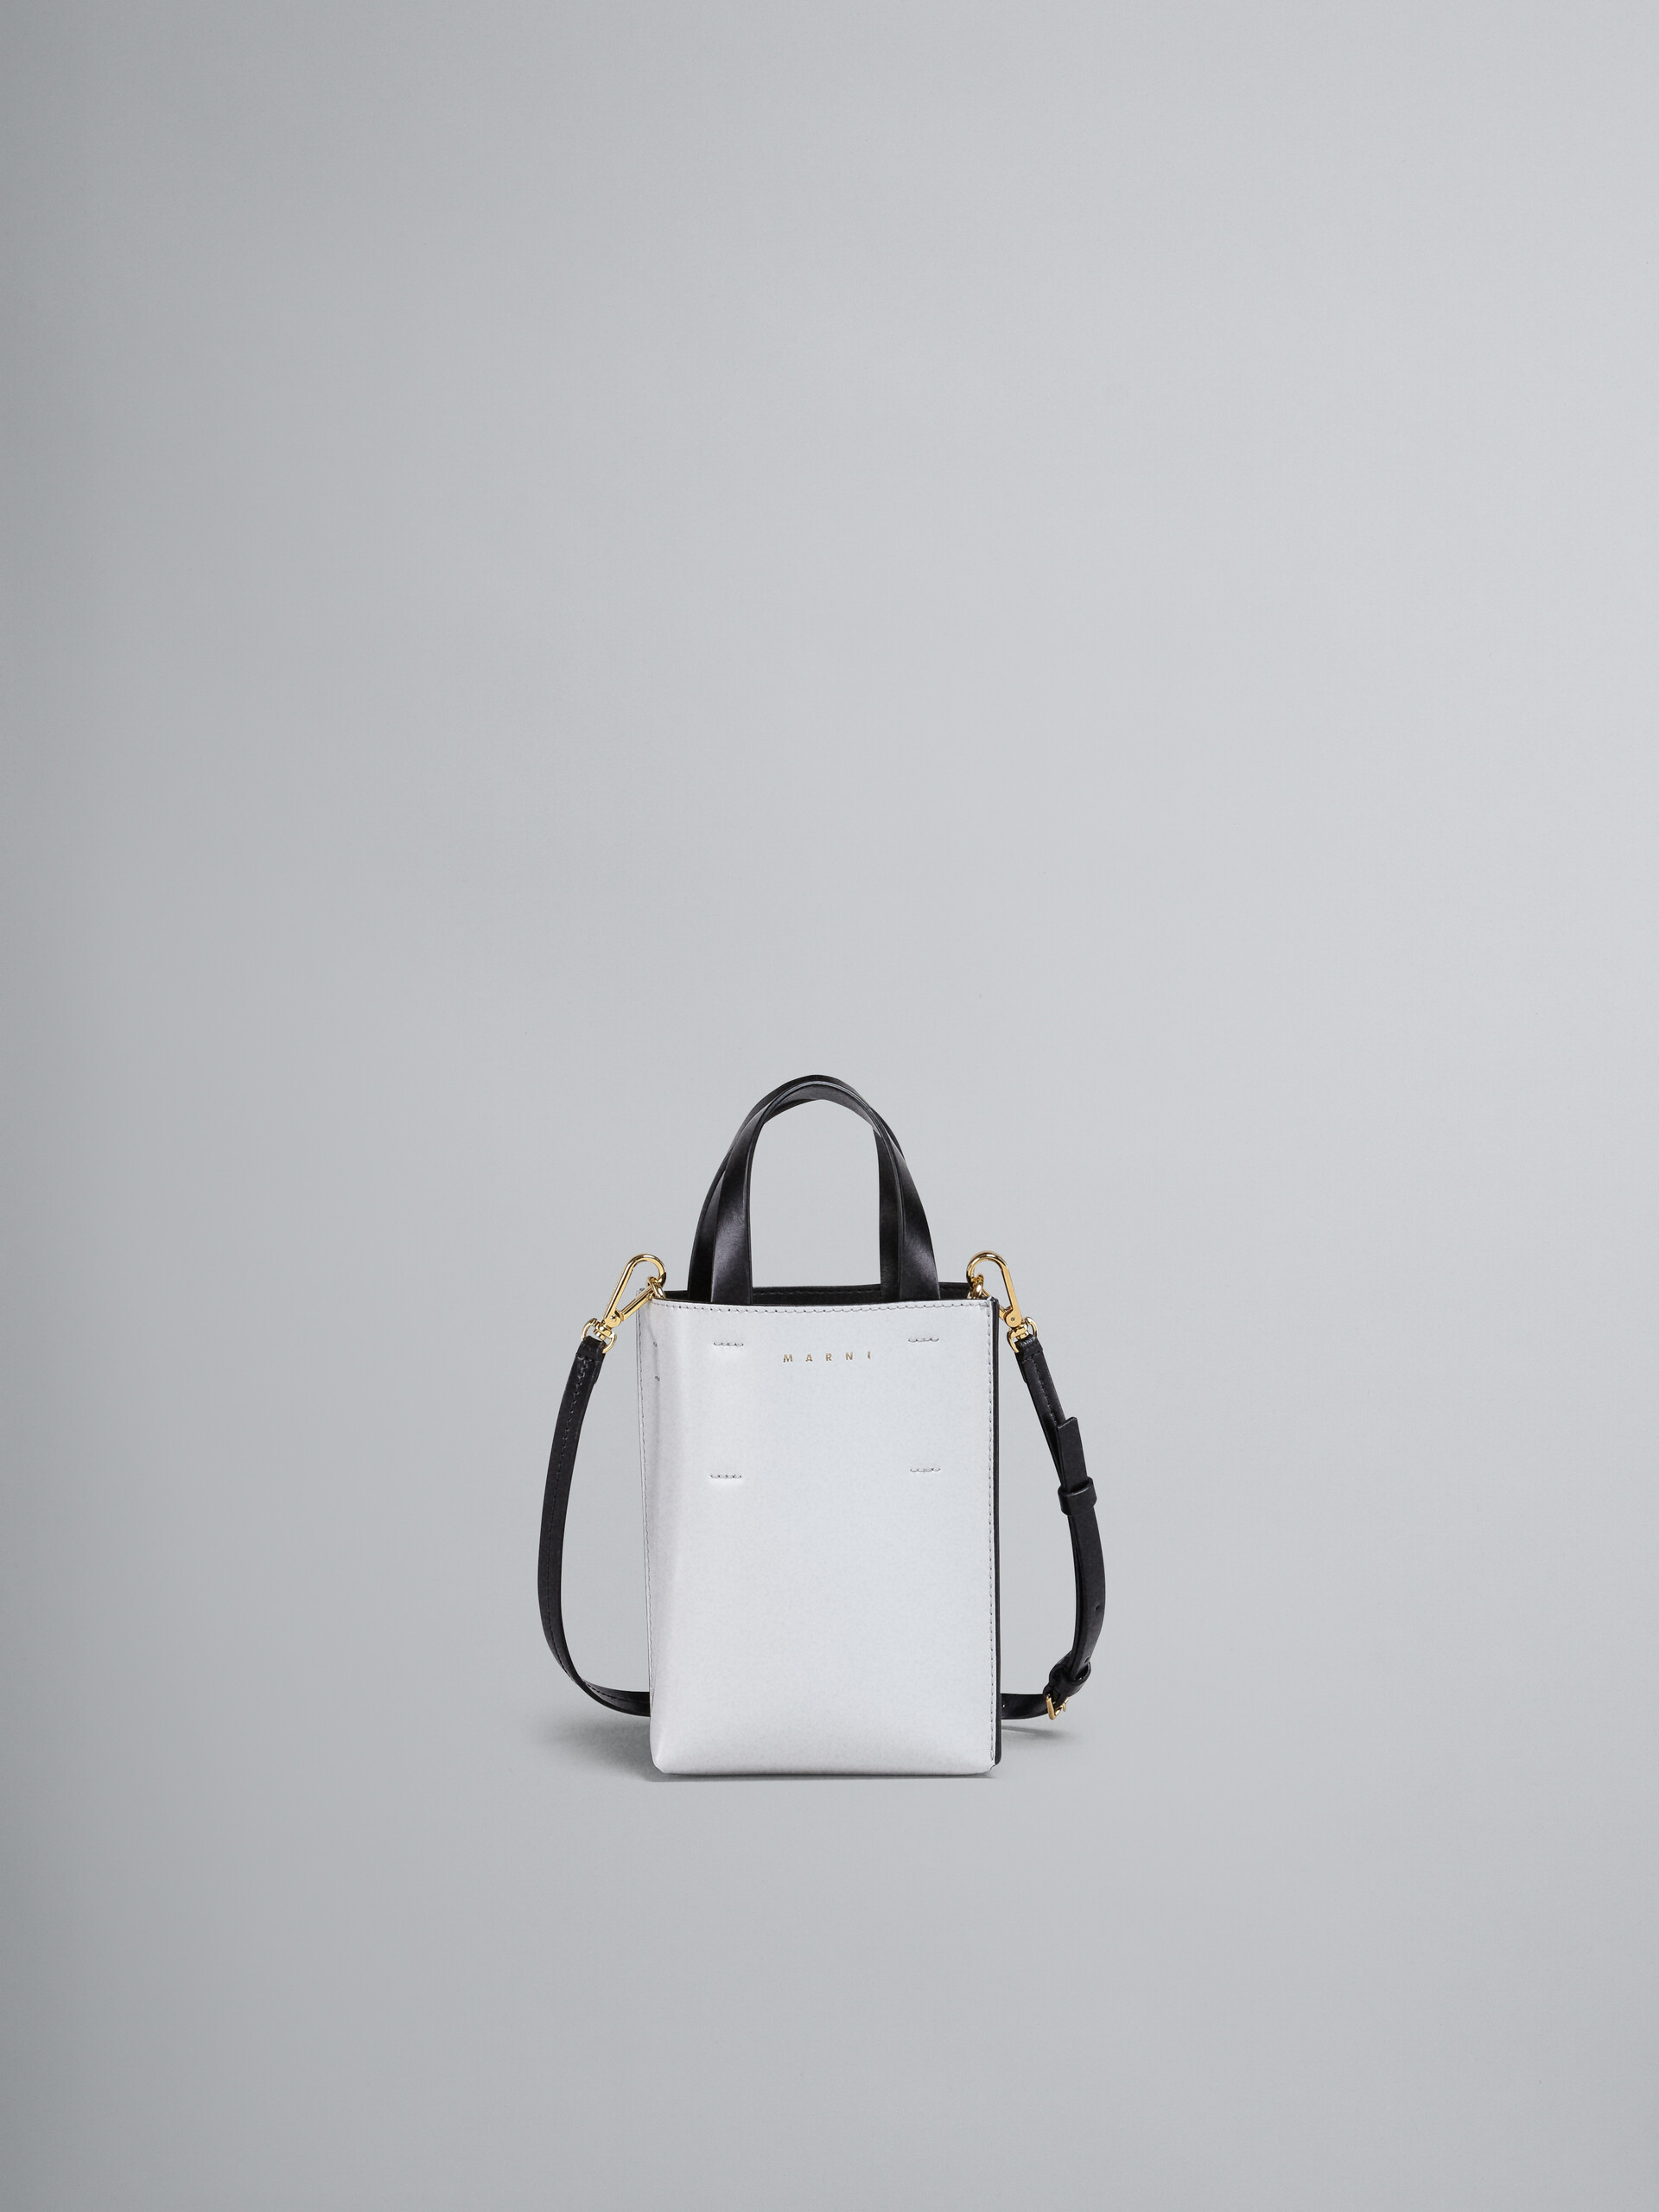 MUSEO nano bag in white and black leather - Shopping Bags - Image 1